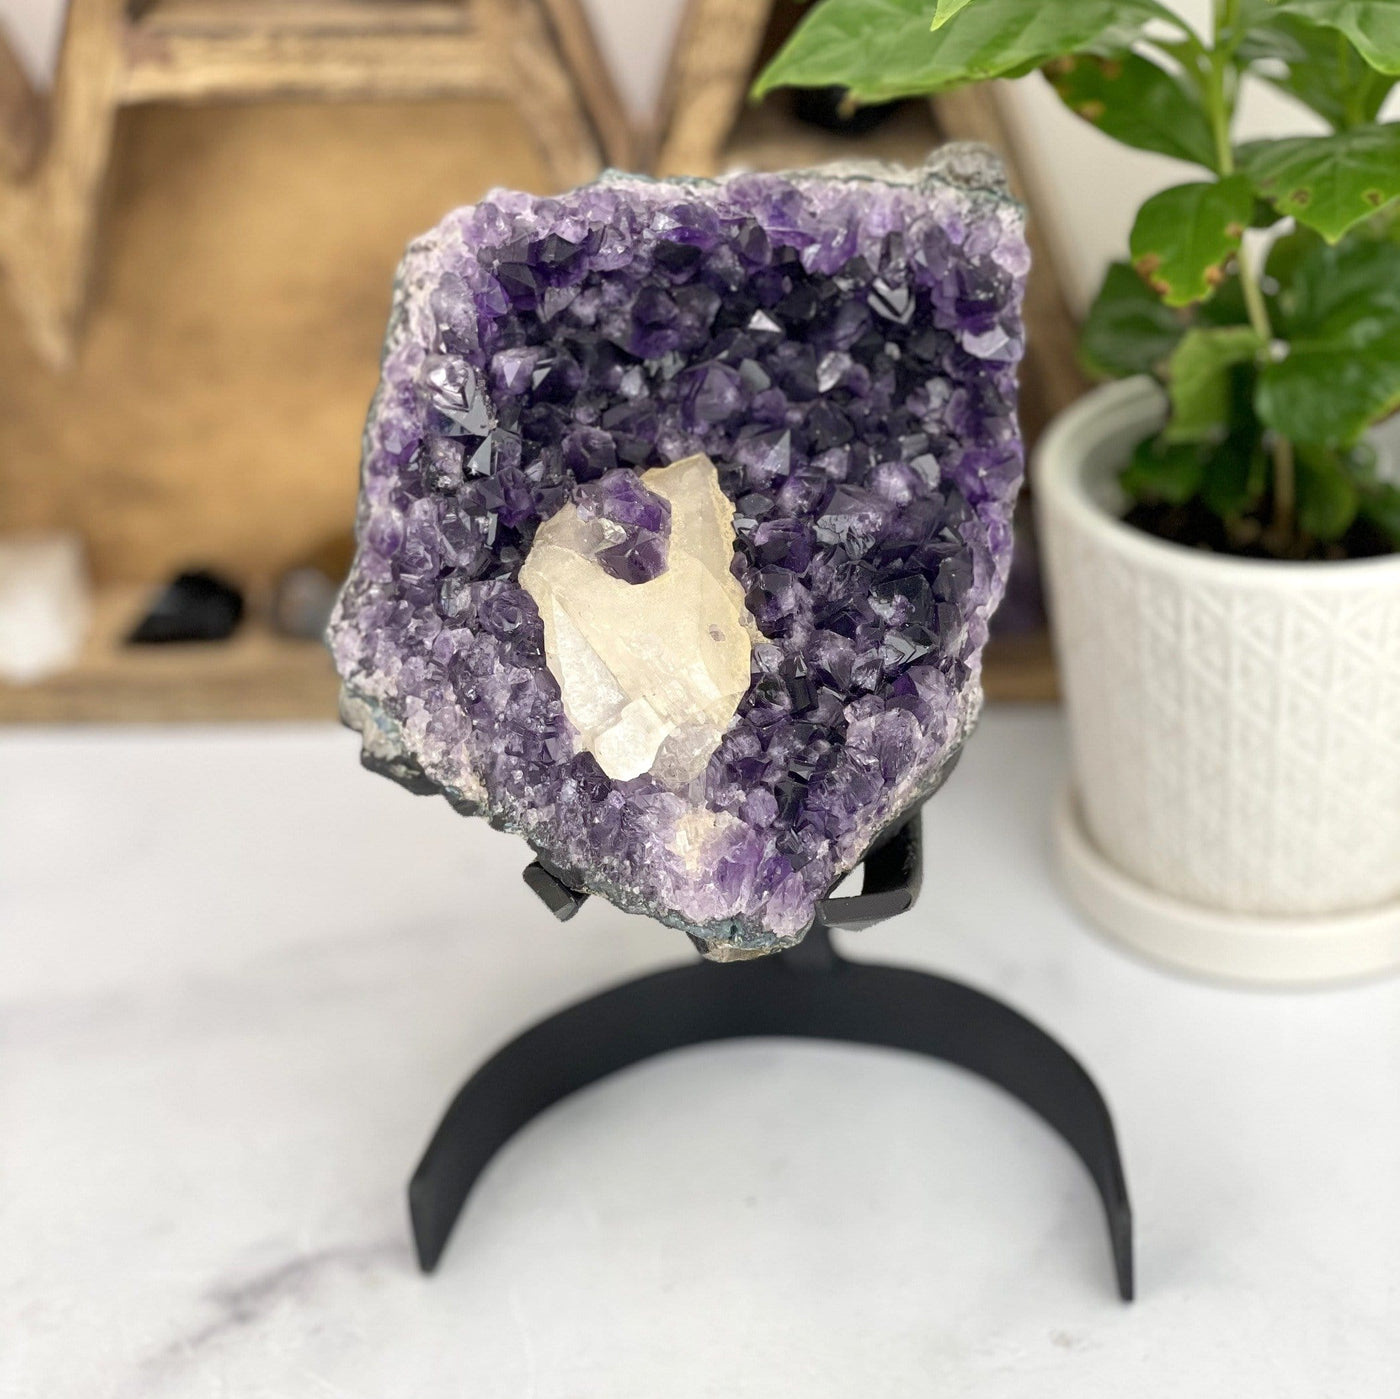 Amethyst Crystal Cluster with Calcite with decorations in the background